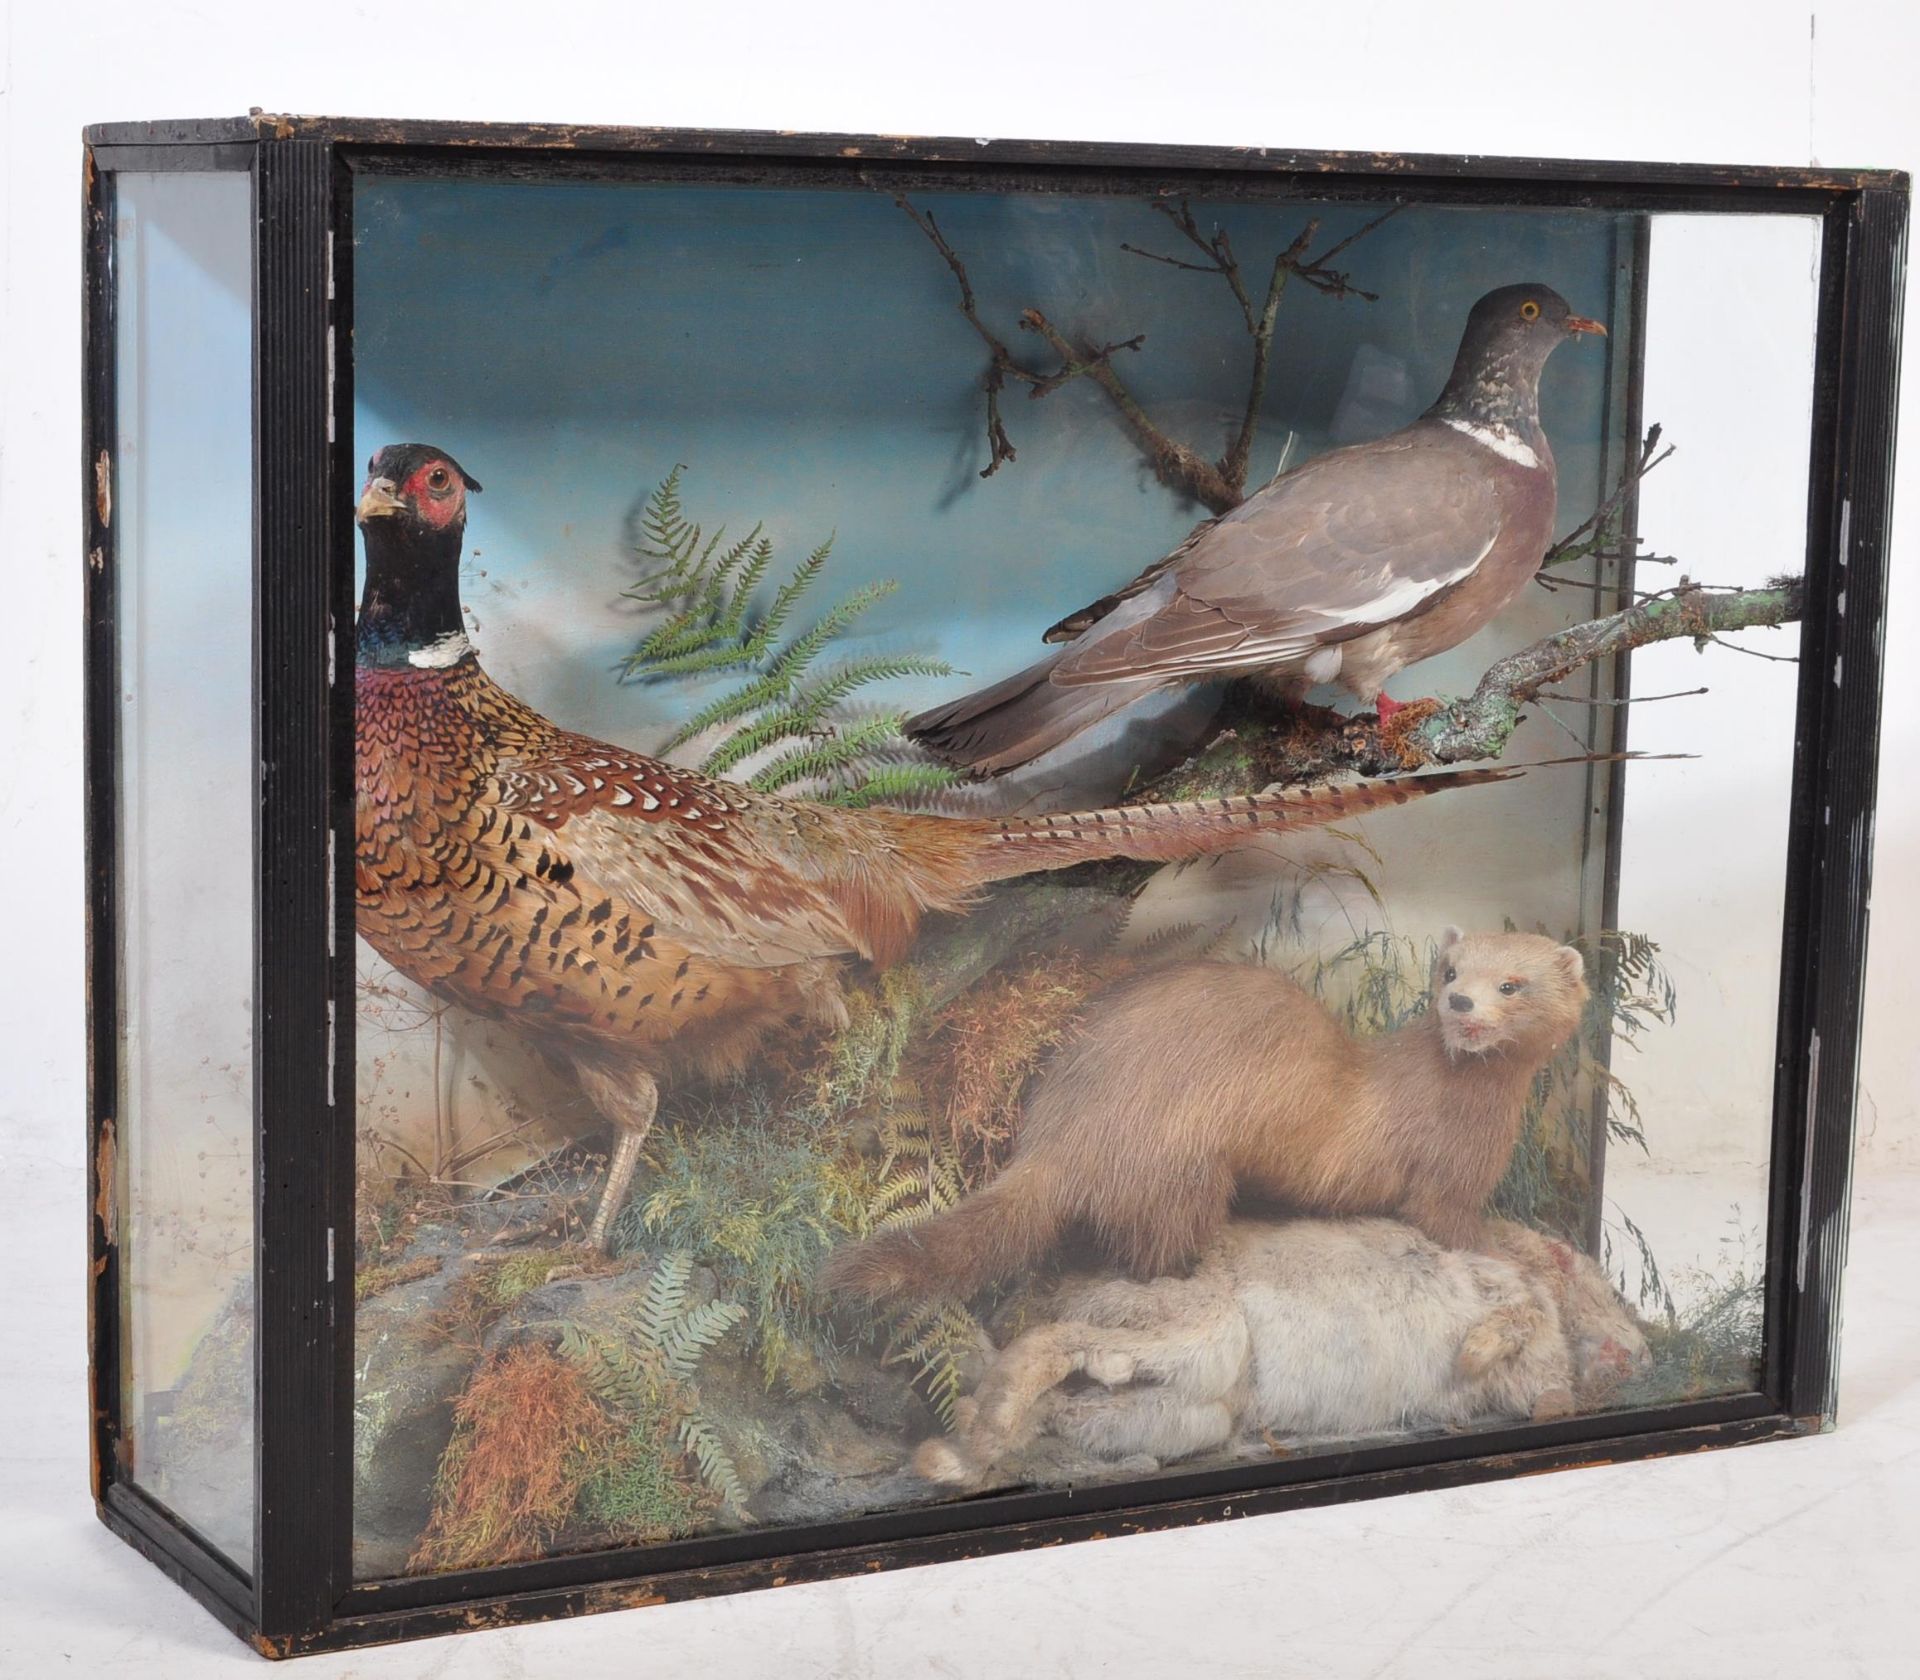 OF TAXIDERMY INTEREST - VINTAGE TAXIDERMY PHEASANT